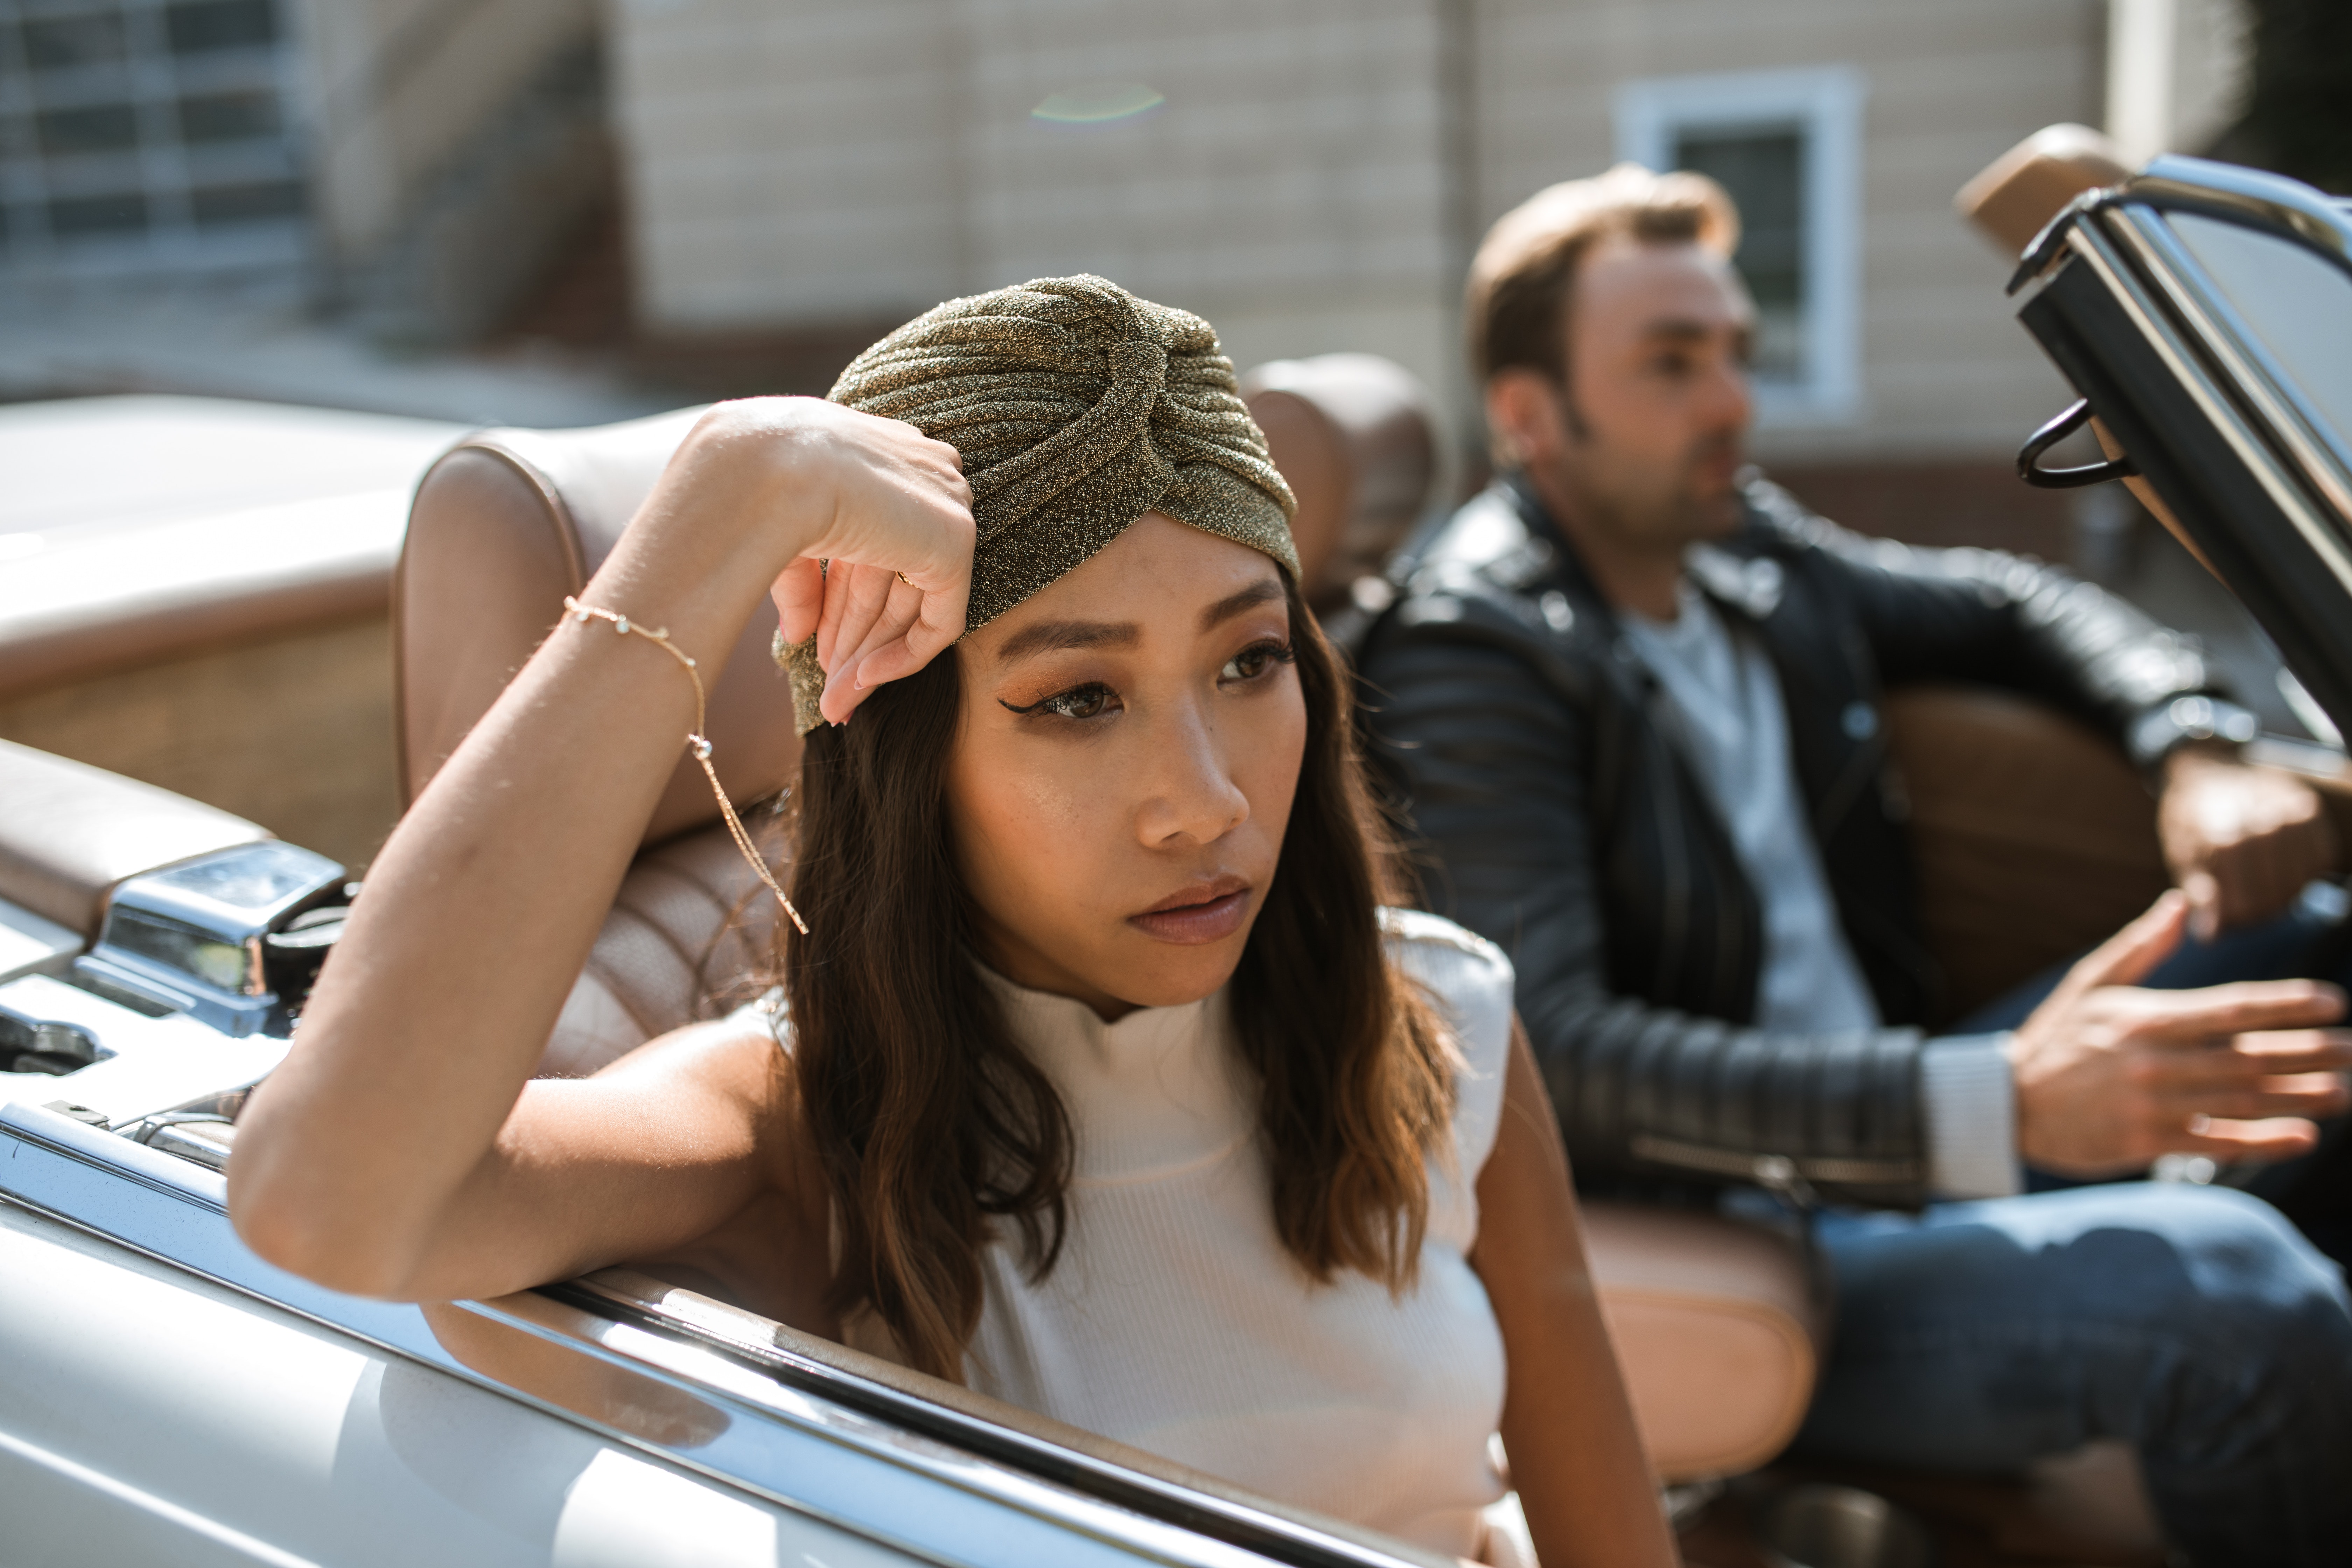 Woman in white tank top sitting in a car feeling annoyed. | Source: Pexels